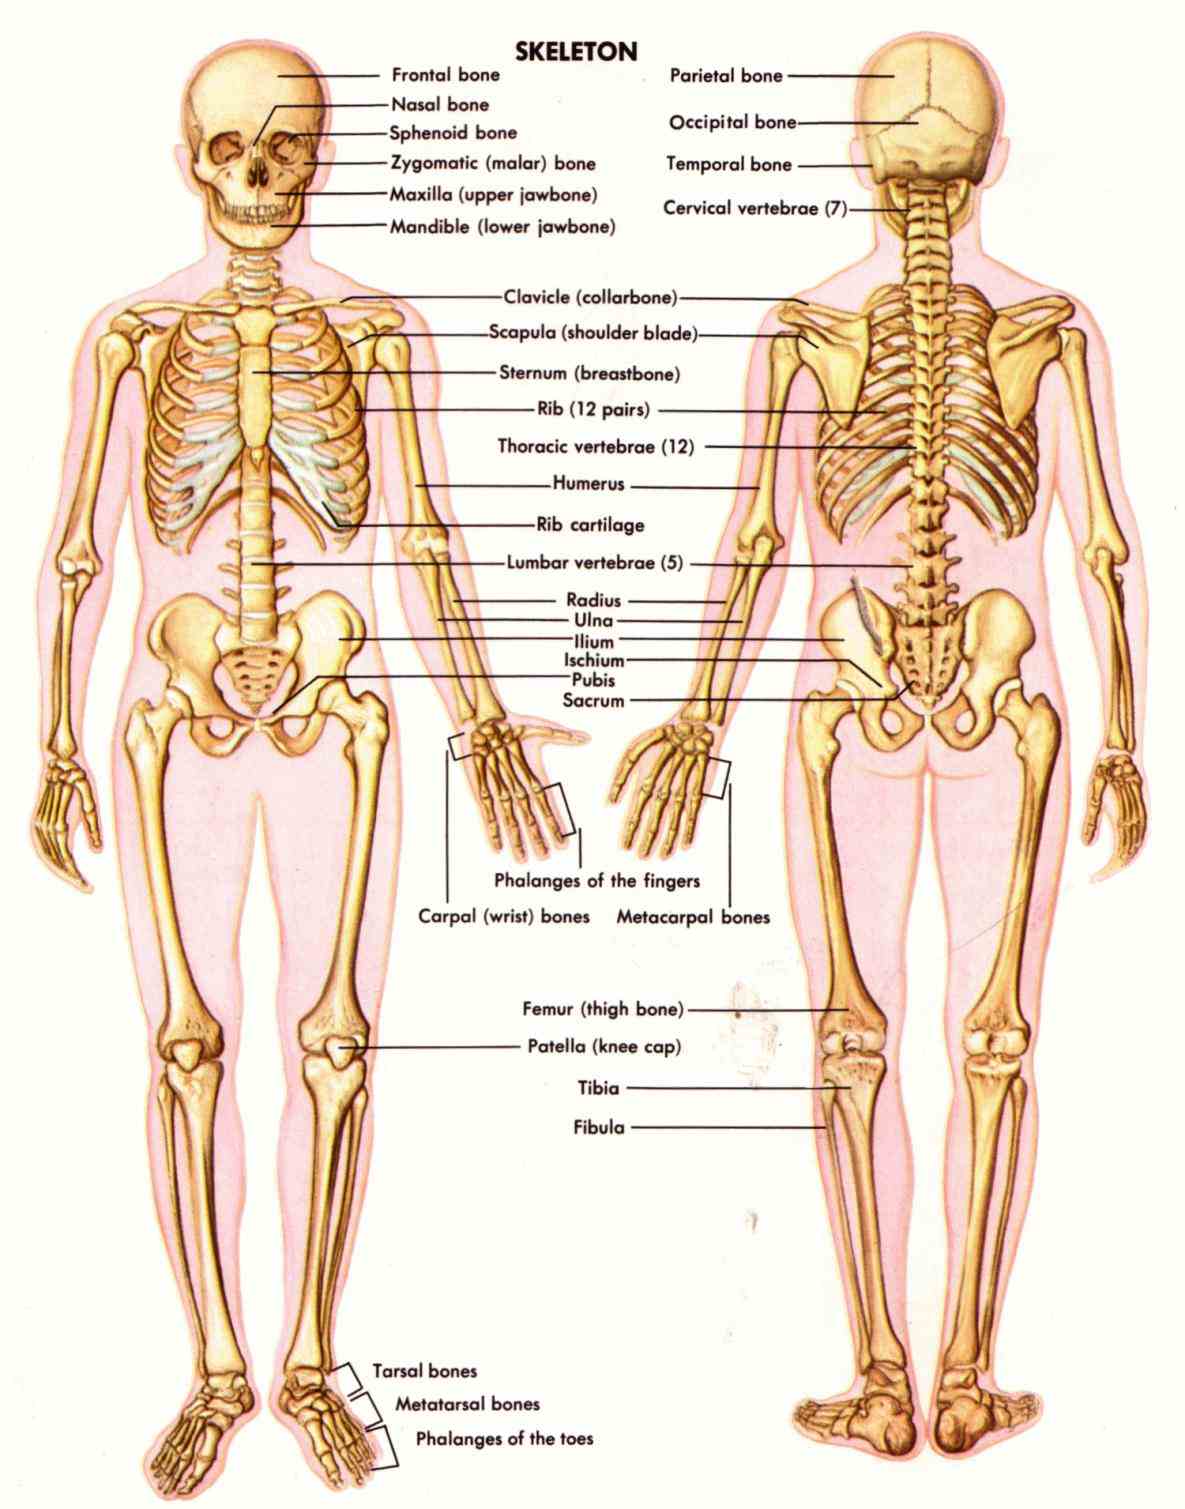 System fev human skeletal system the internal skeleton that serves as a framework for body this consists of many